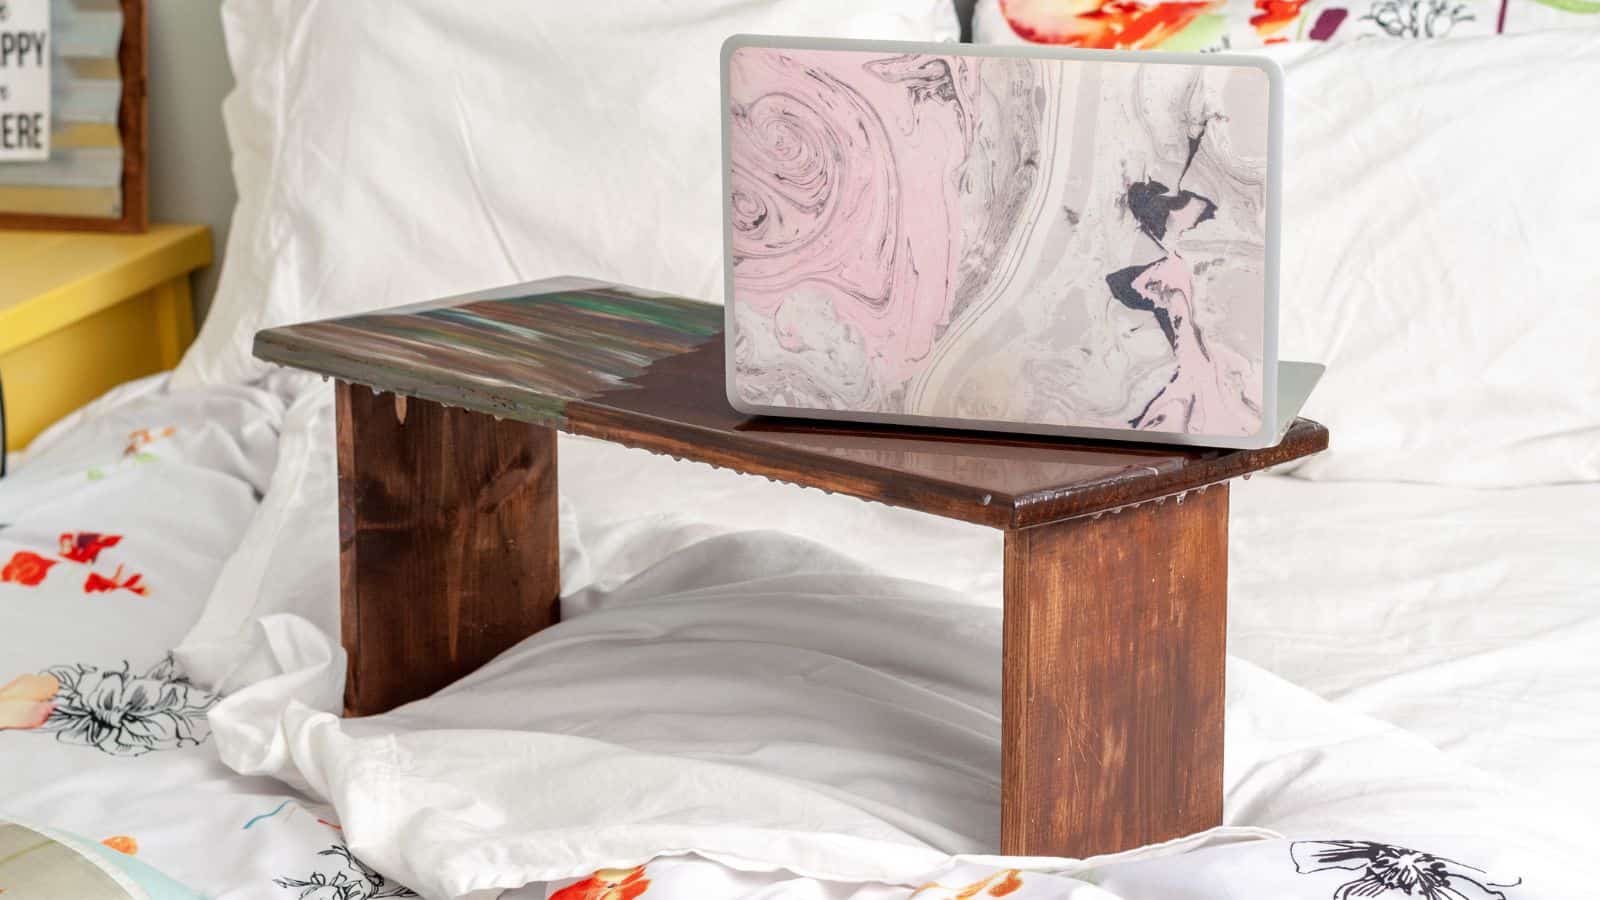 <p>This lap desk is a simple build using basic tools, but the magic happens with the finish on top. The faux epoxy top uses unicorn spit, a gel stain, and a glaze coat that comes in striking colors. Let your child express their creativity when finishing their lap desk. <a href="https://www.anikasdiylife.com/diy-lap-desk-epoxy-resin/">Plans and tutorial here.</a></p>